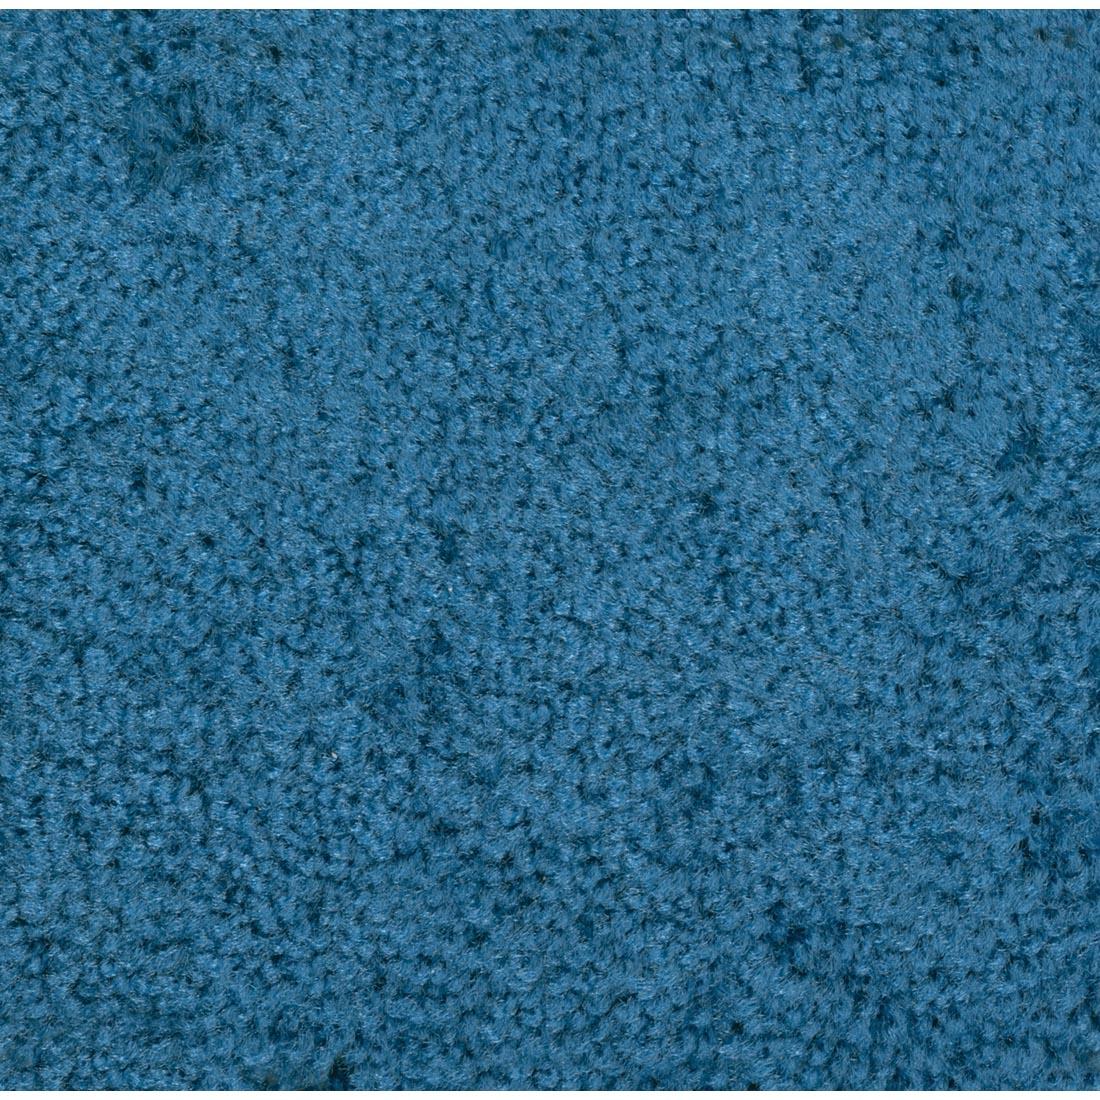 Marine Blue-colored carpet swatch from the Rectangle Rug by Carpets For Kids